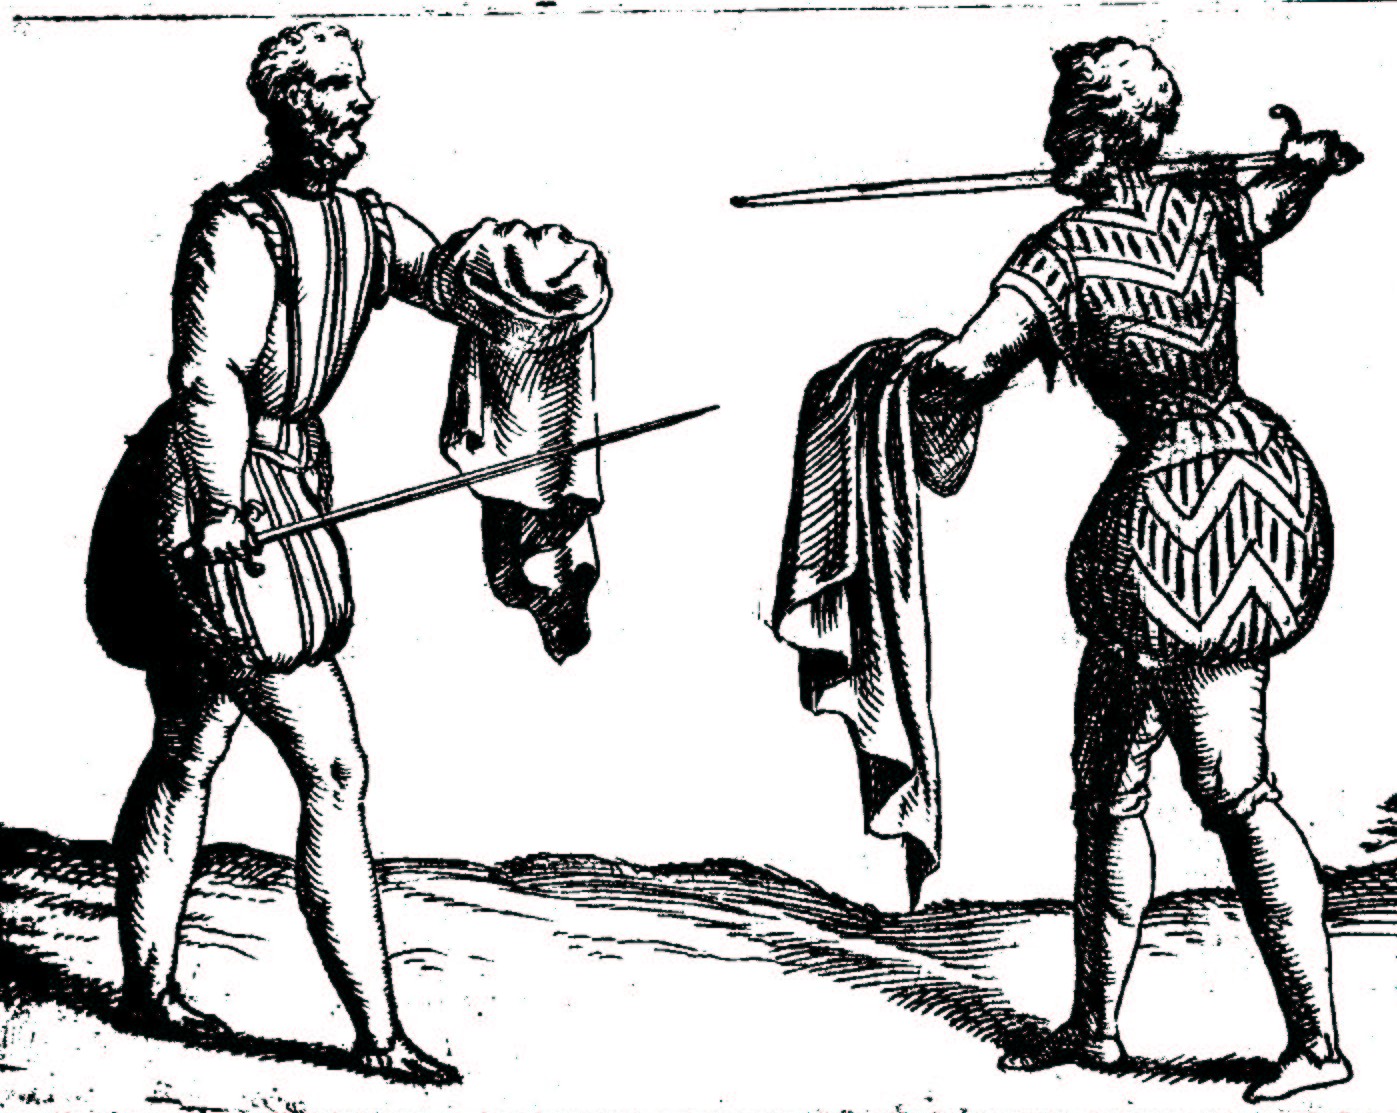 Two duellists armed with rapier and cloak.